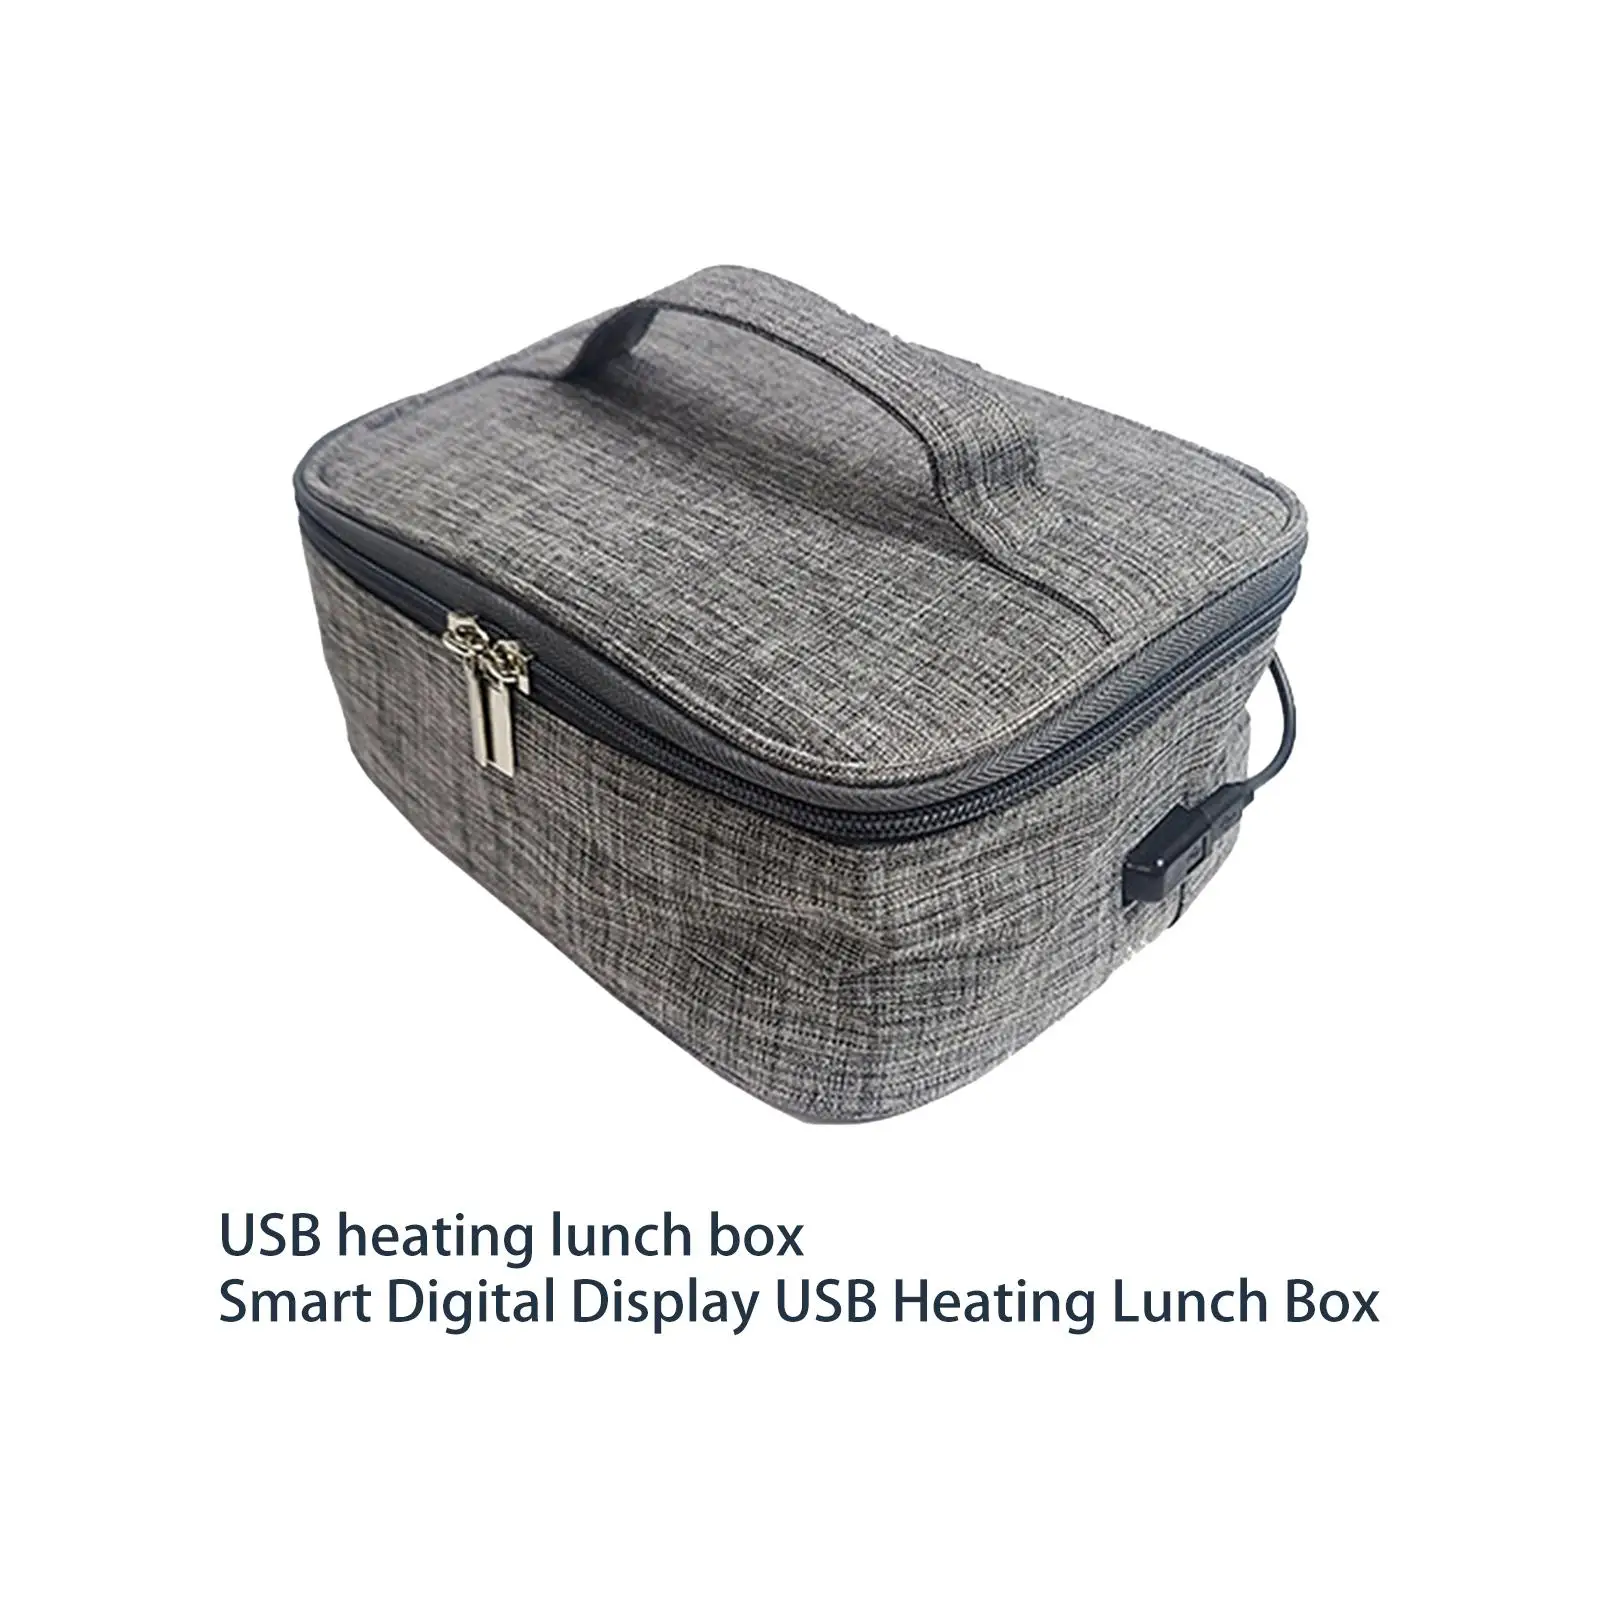 USB Heated Lunch Boxes Bag Container Oxford Cloth for Office Food Warmer Lunch Heater Tote Personal Microwave Durable Convenient